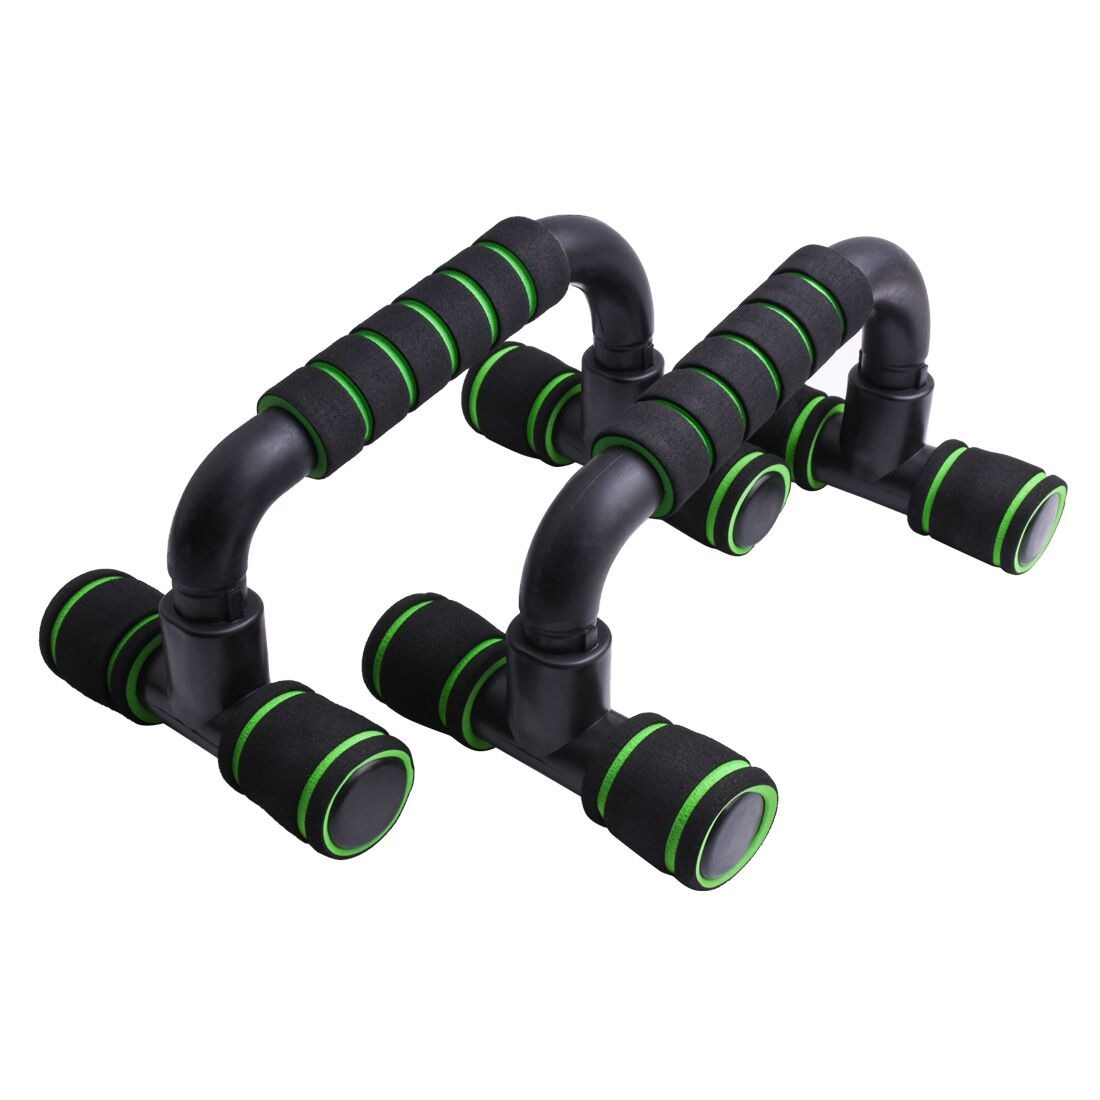 1pair I-shaped Push-up Rack Fitness Equipment Hand Sponge Grip Muscle Training Push Up Bar Chest Home Gym Body Building